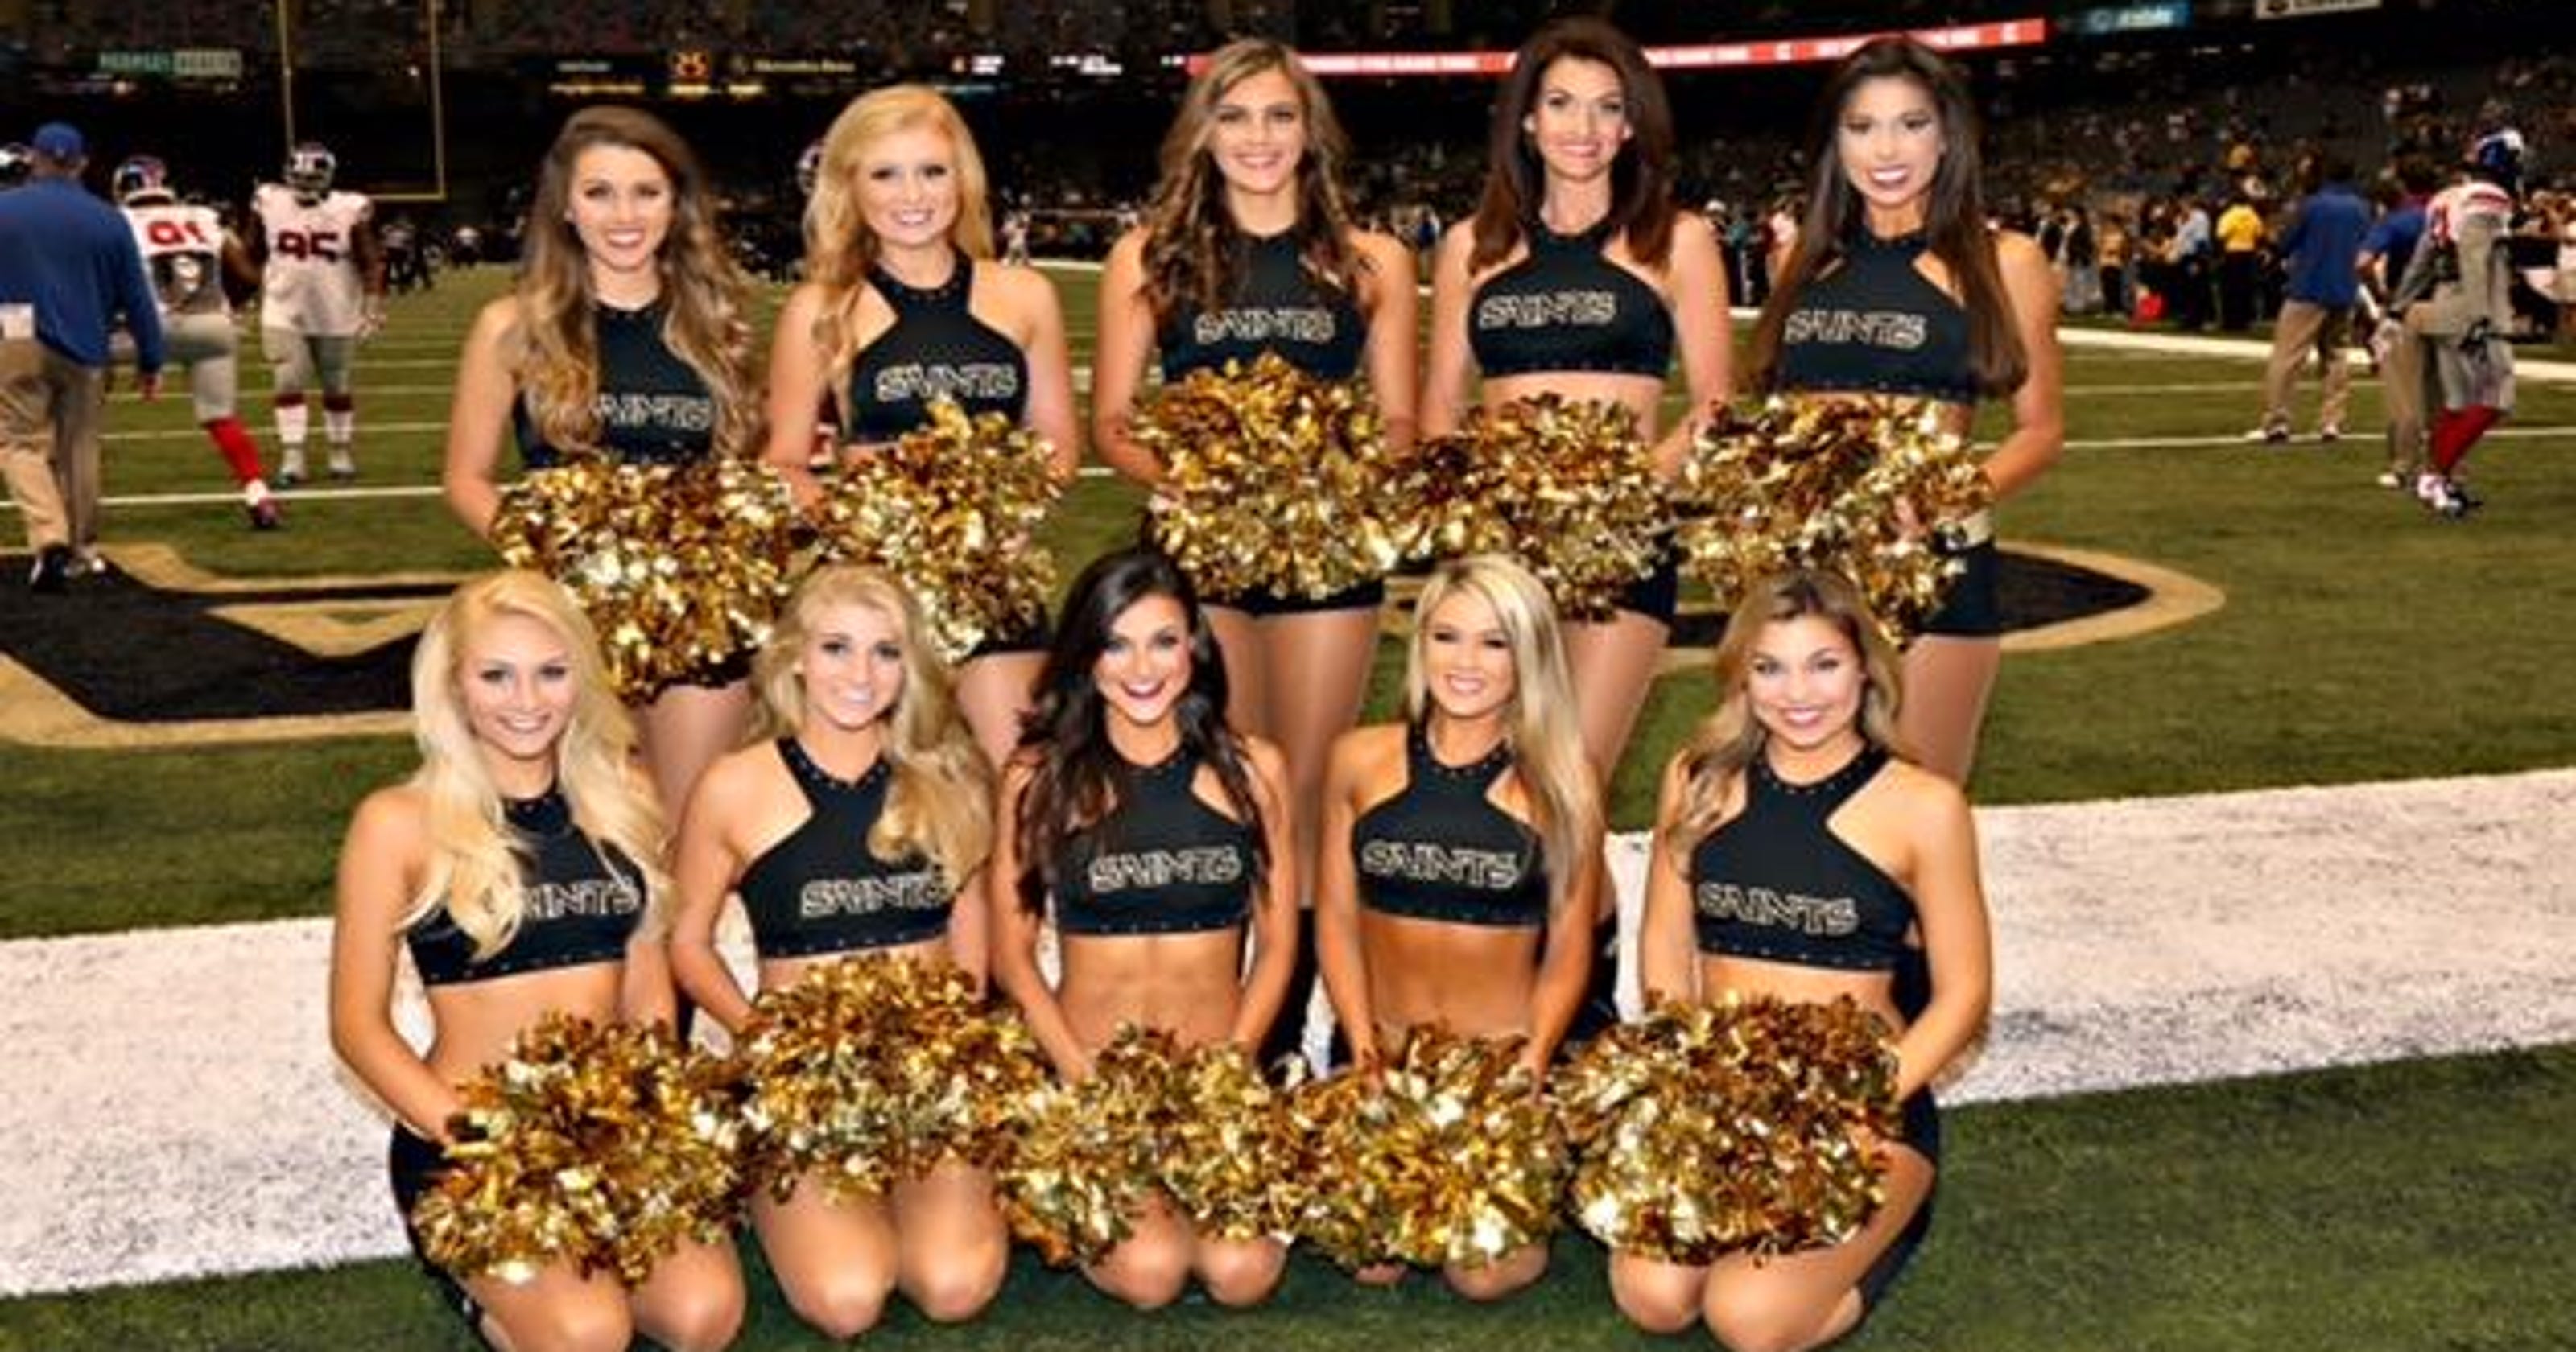 Thirds of Saints' cheerleaders from Mississippi